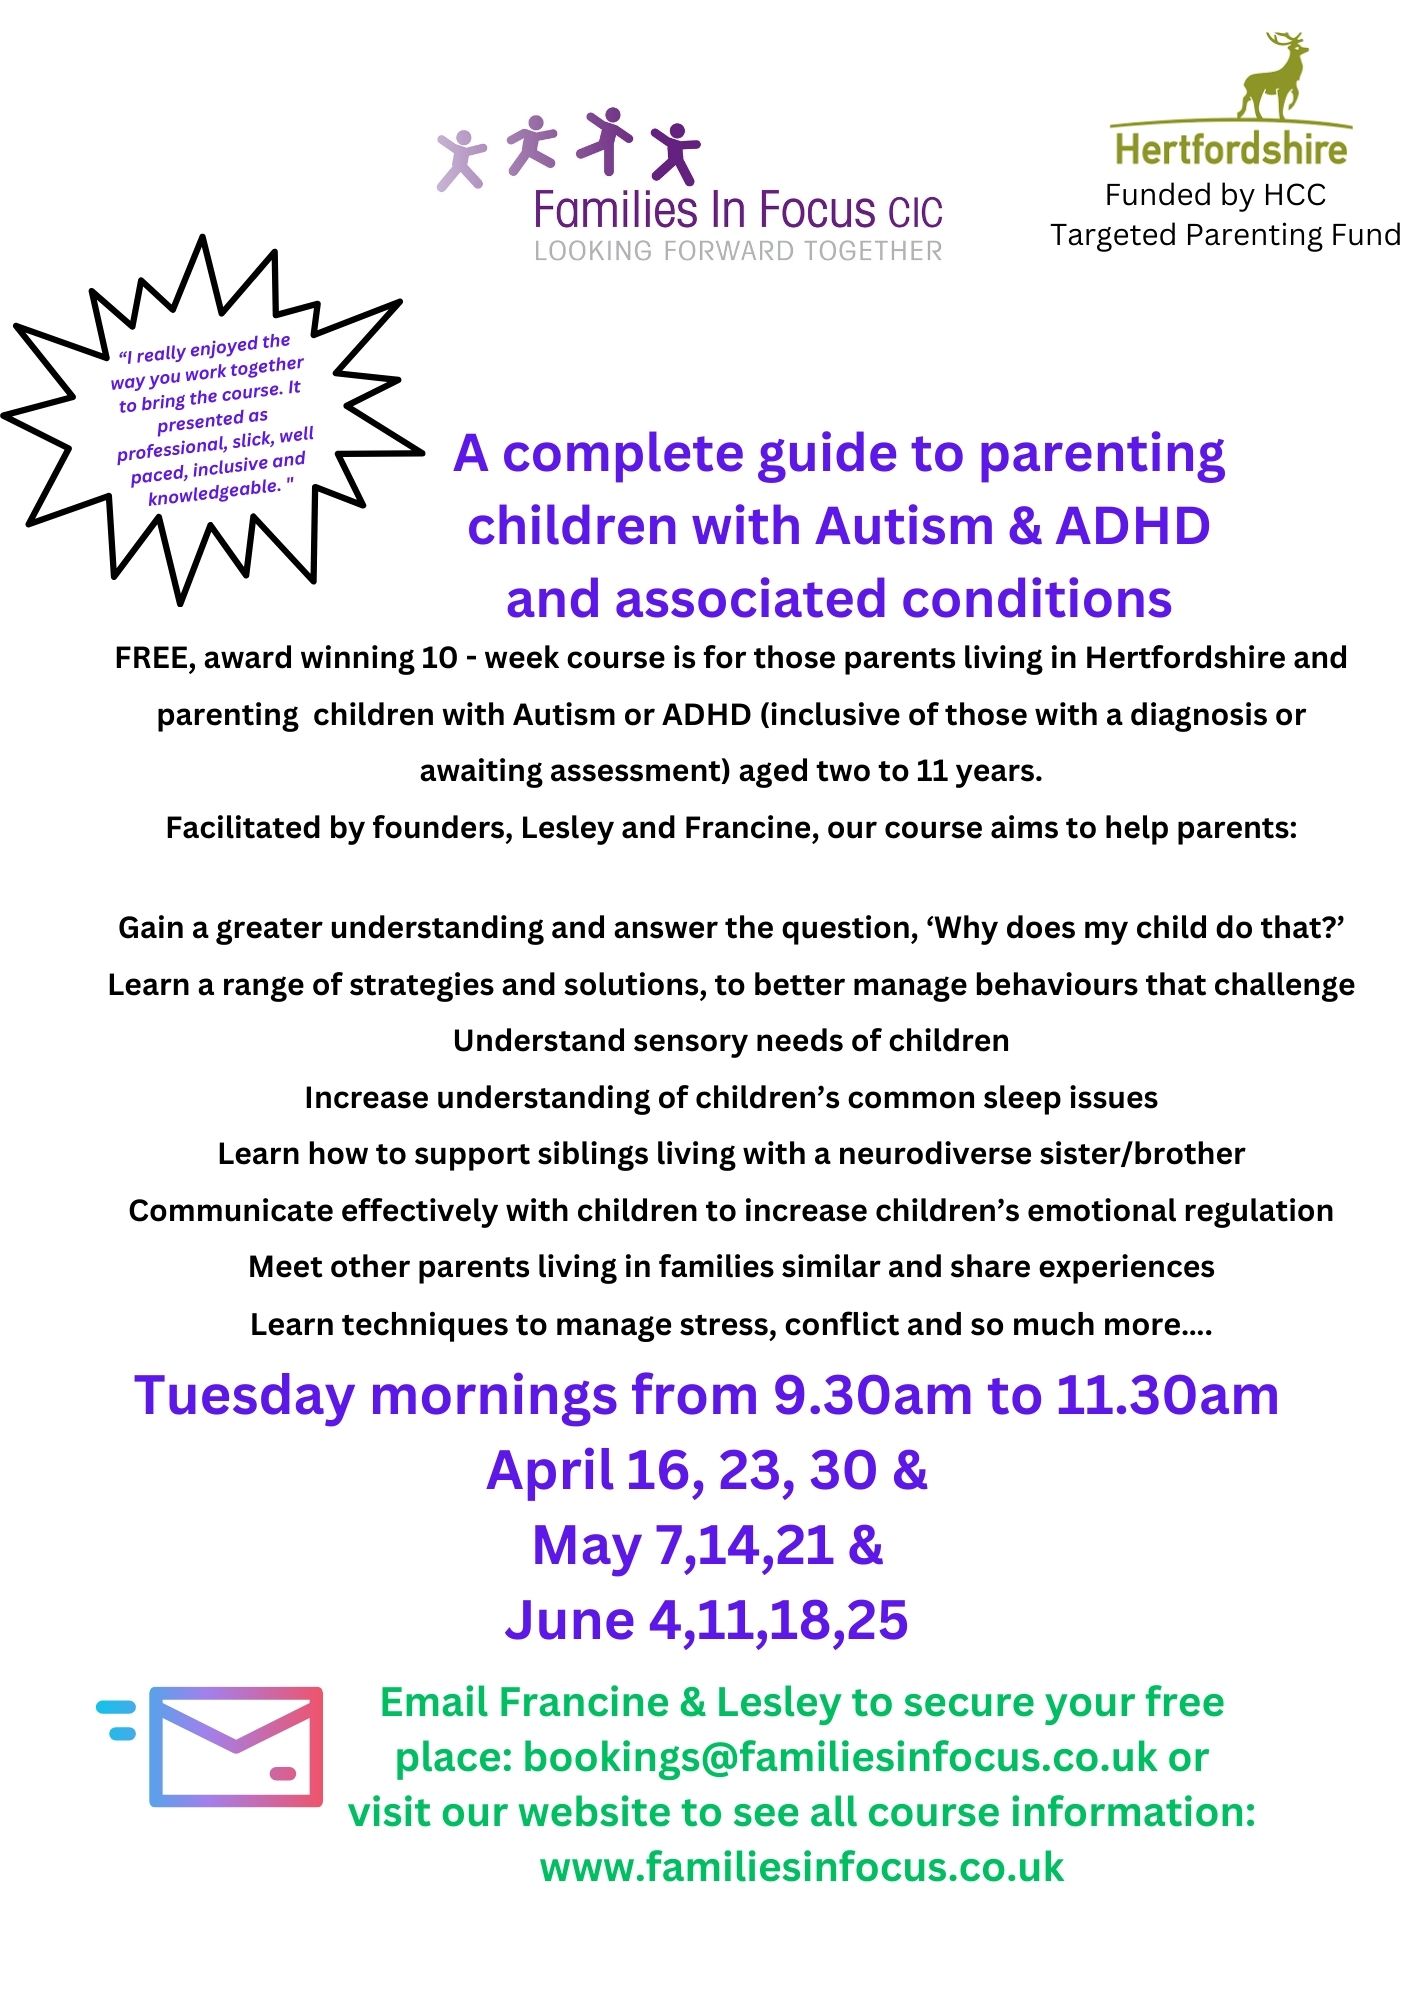 L1 D1 Families in Focus A Complete Guide course Tuesday AM April to June 2024